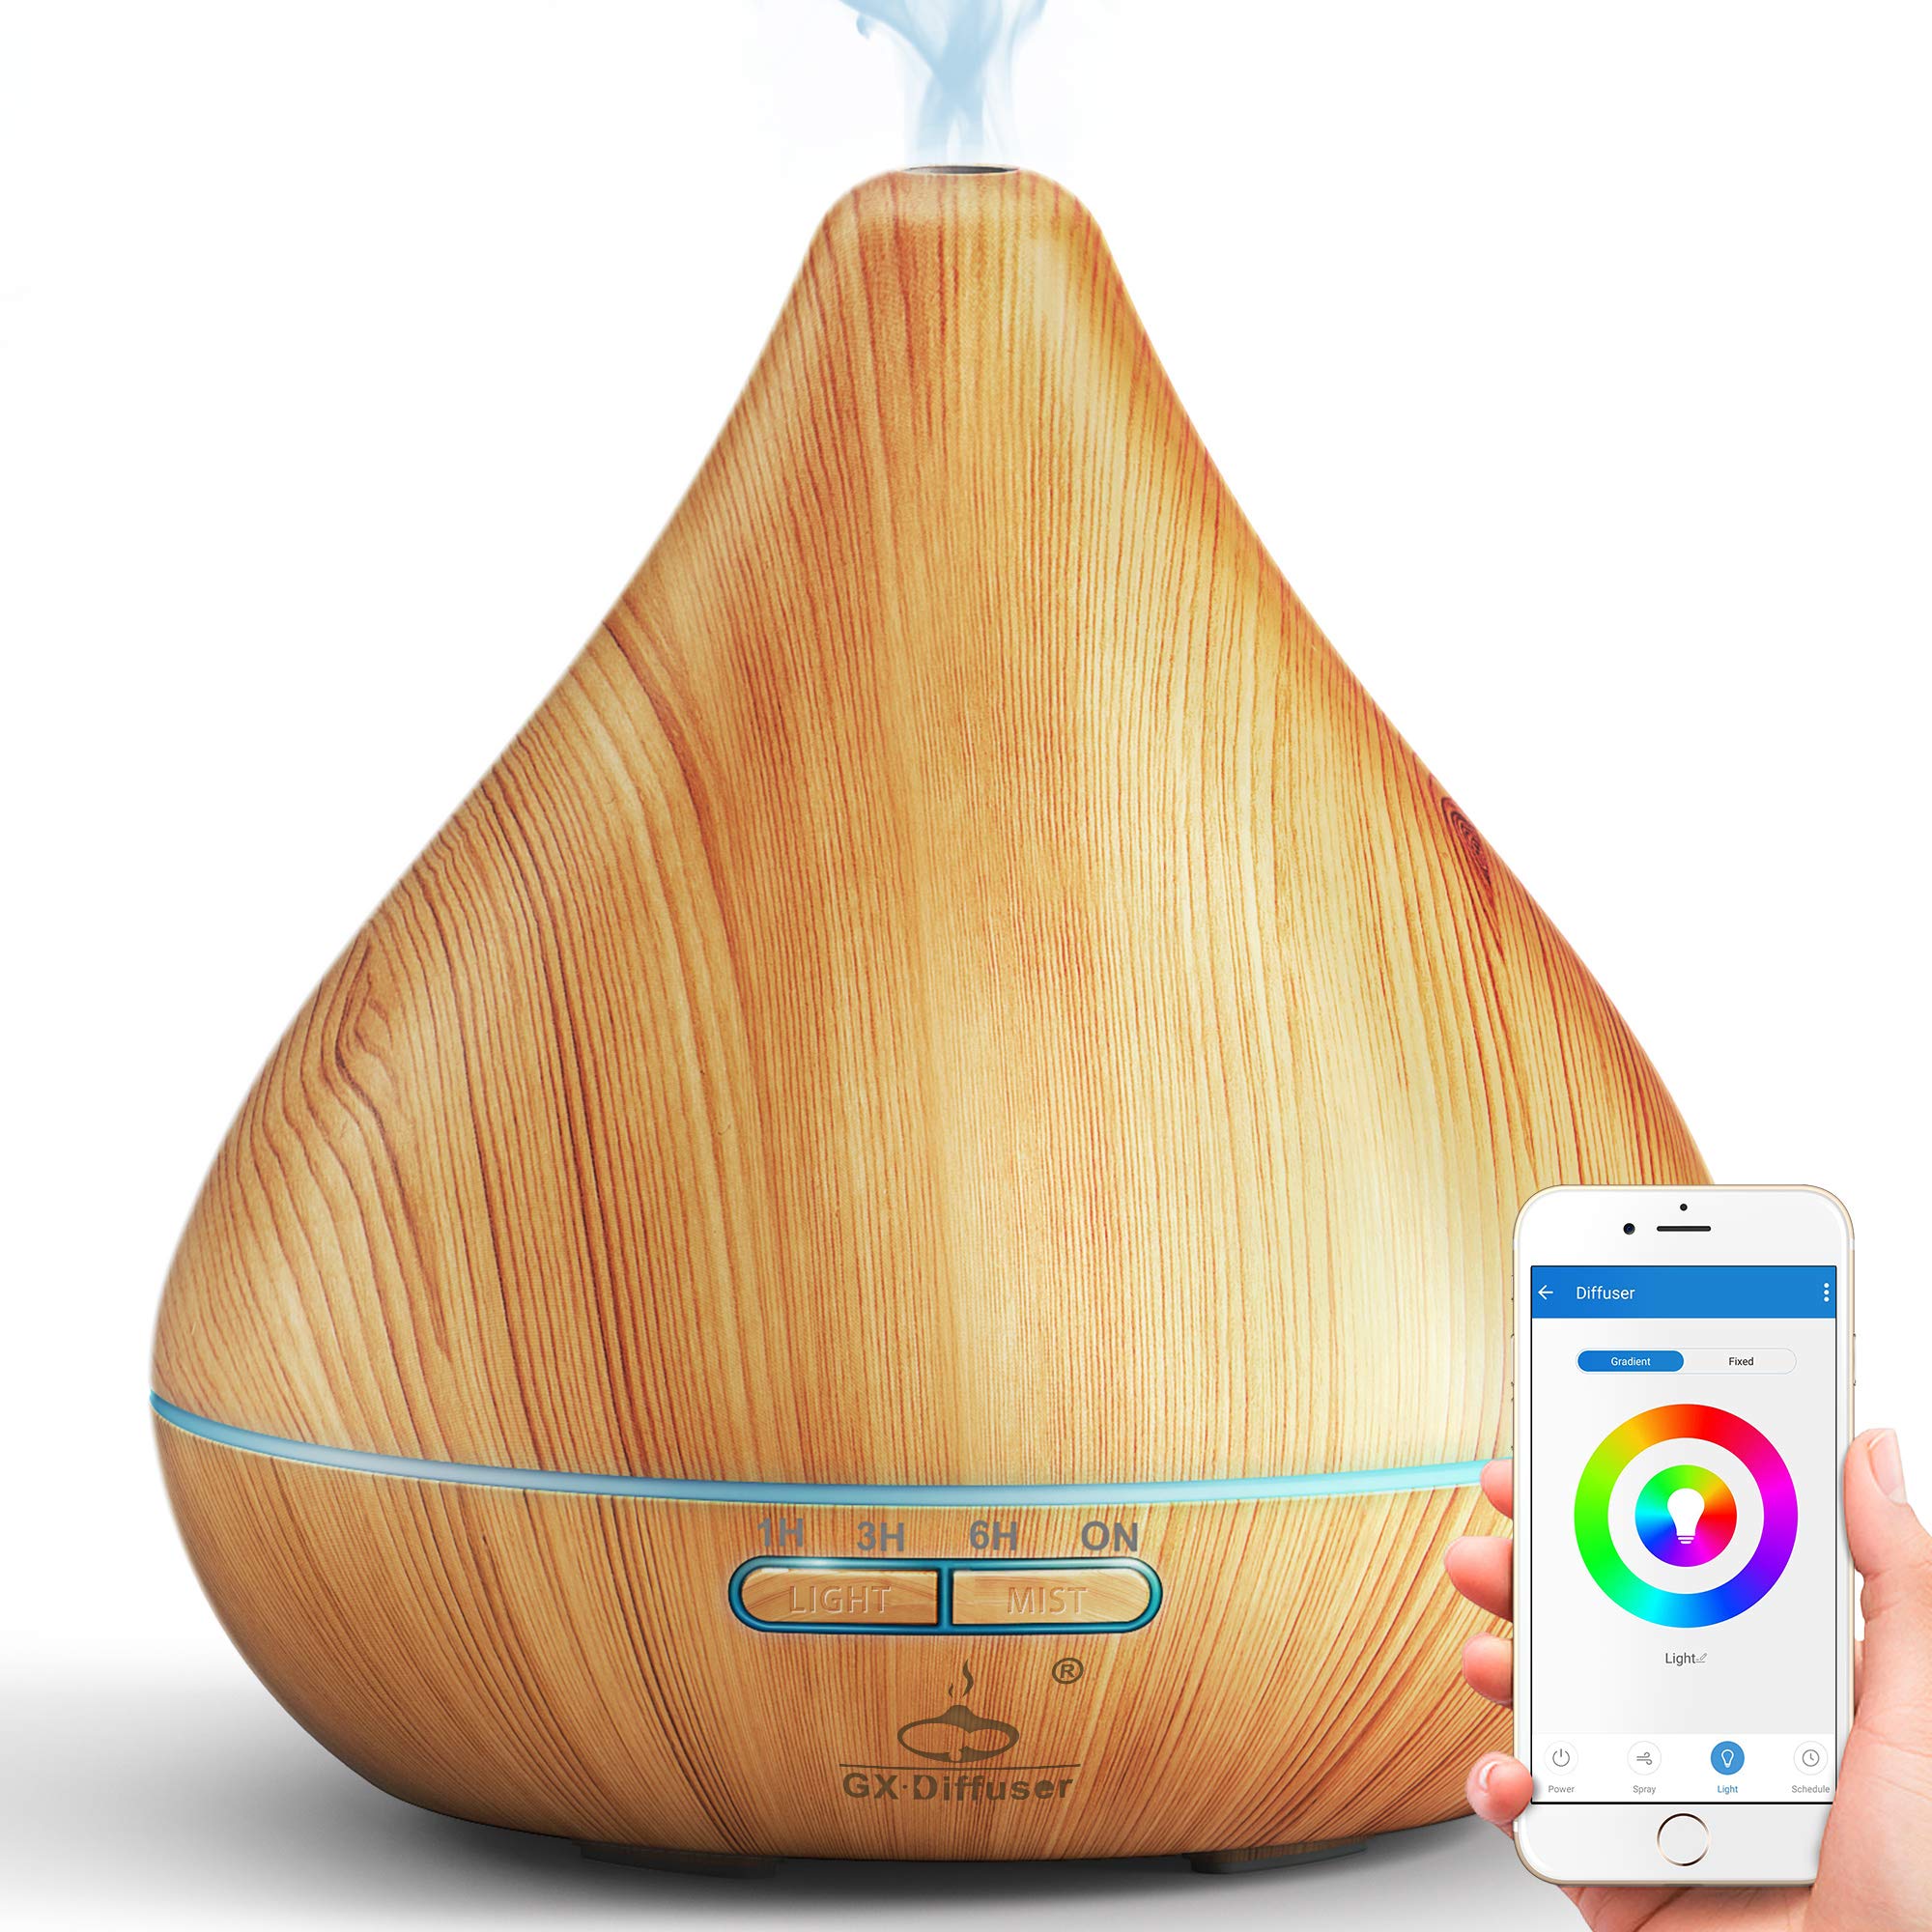 GX.Diffuser Smart WiFi Essential Oil Diffuser,App Control Compatible with Alexa & Google Home, 300ml Aroma Humidifier Cool Mist Atomizer for Air Pu...